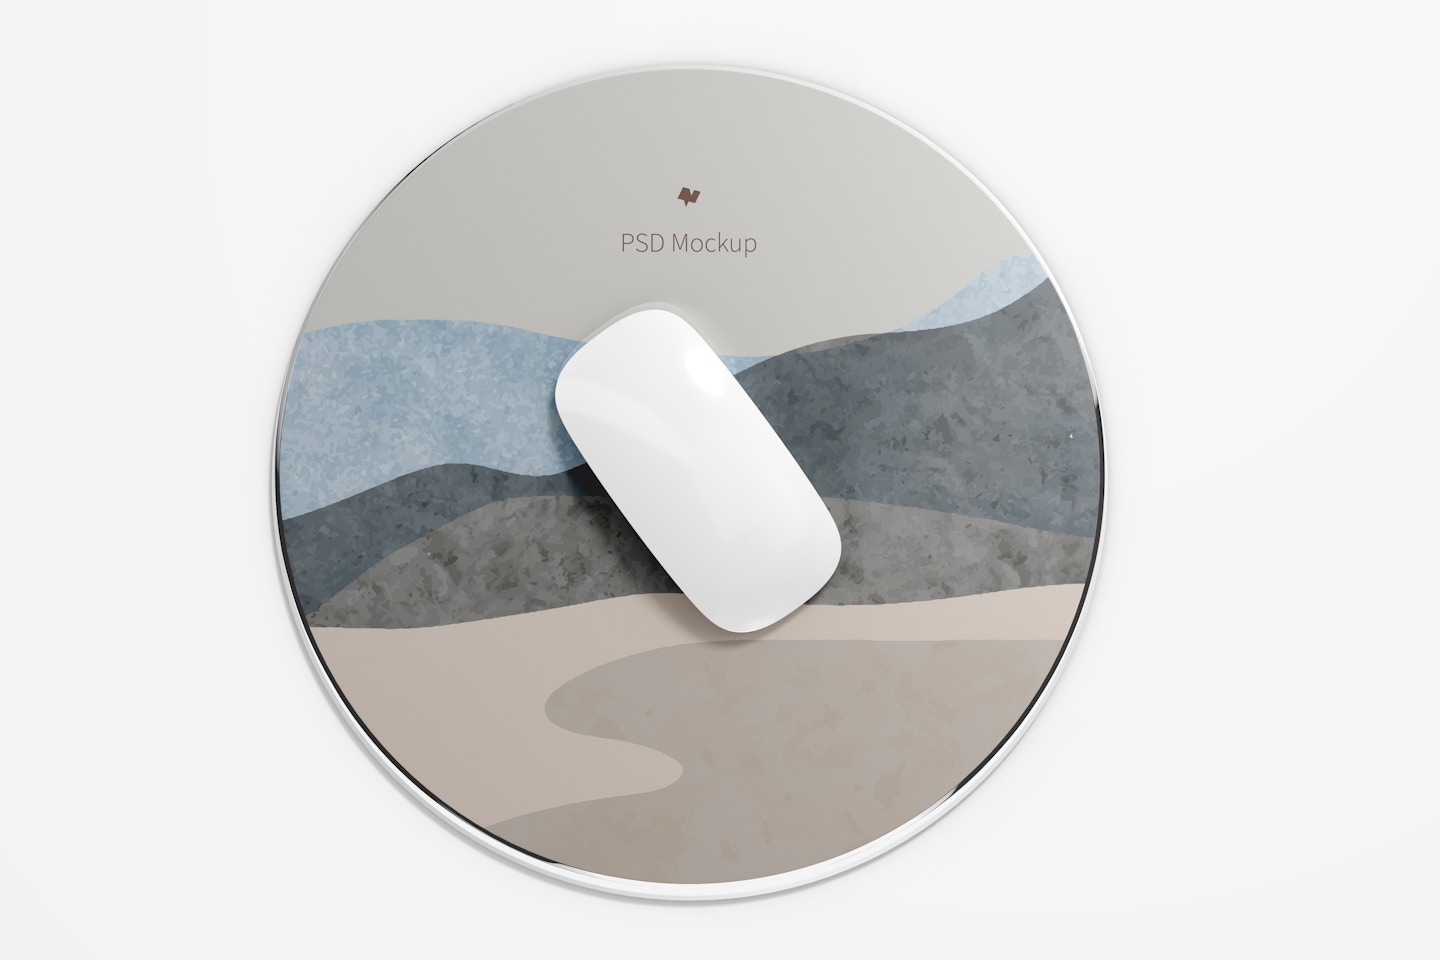 Round Aluminum Mouse Pad Mockup, Top View